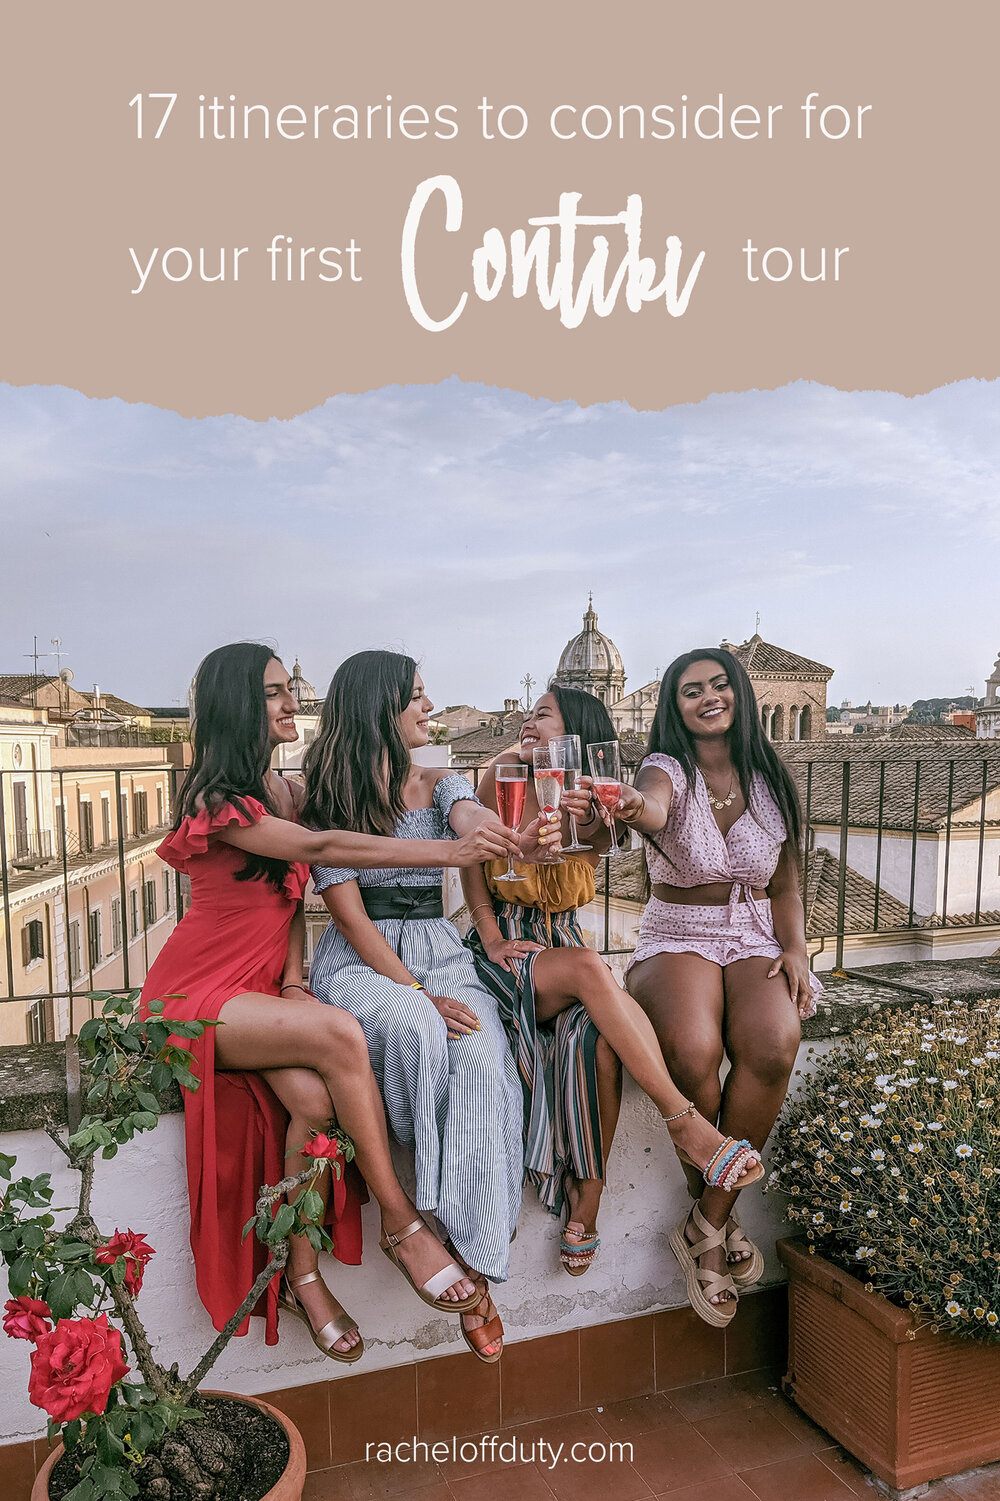 Rachel Off Duty: Everything You Need to Know for Your First Contiki Tour (Plus Trip Recommendations)